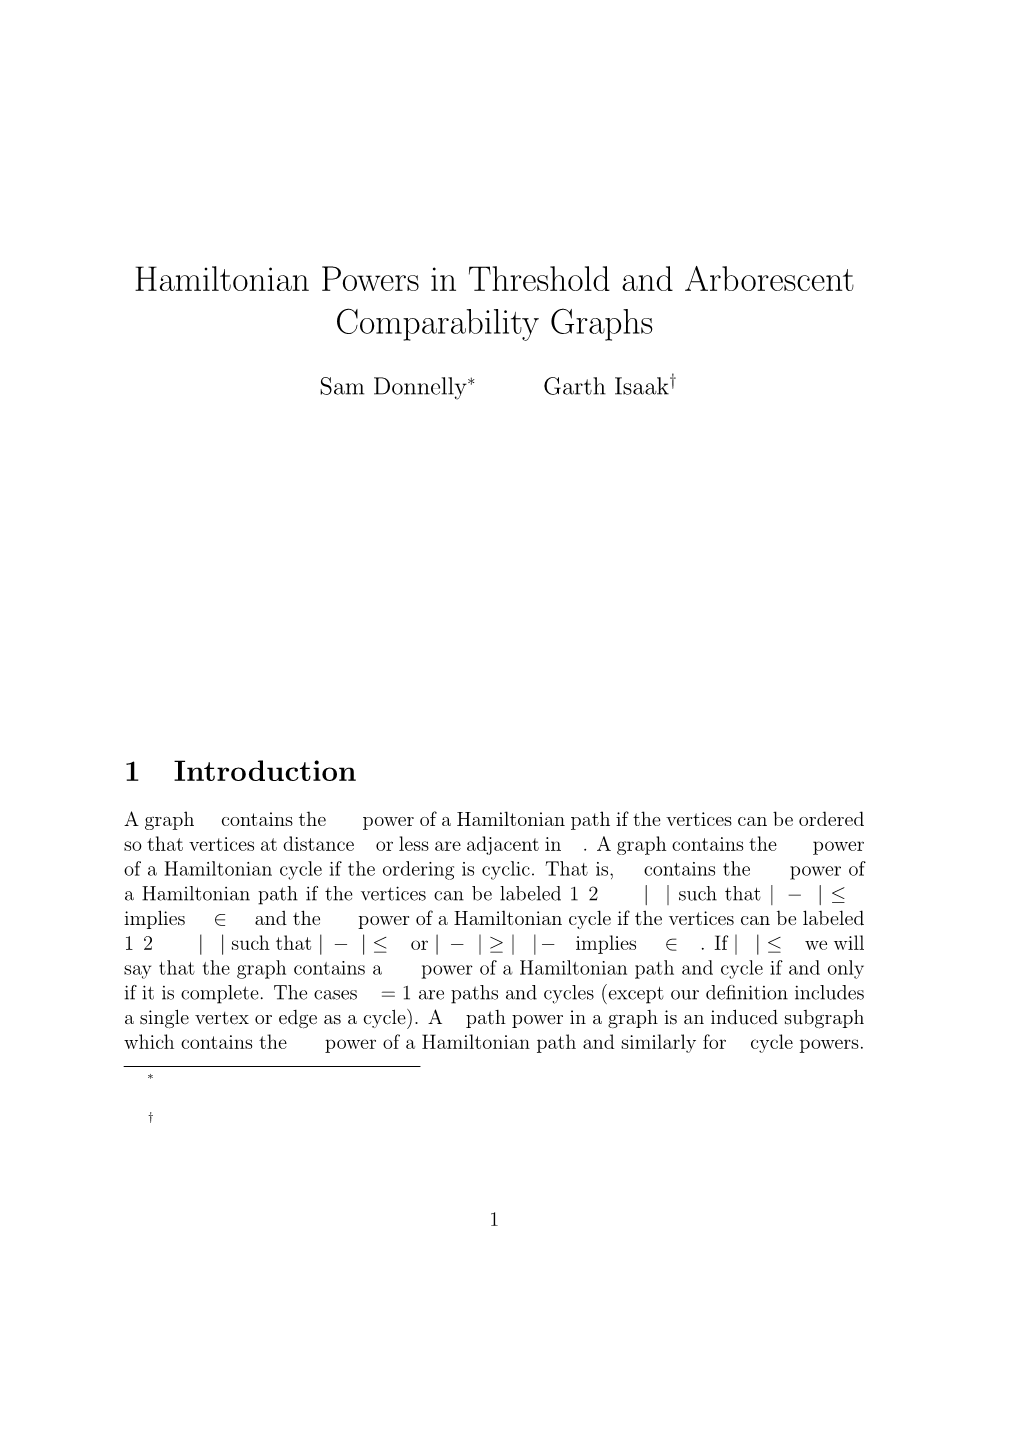 Hamiltonian Powers in Threshold and Arborescent Comparability Graphs